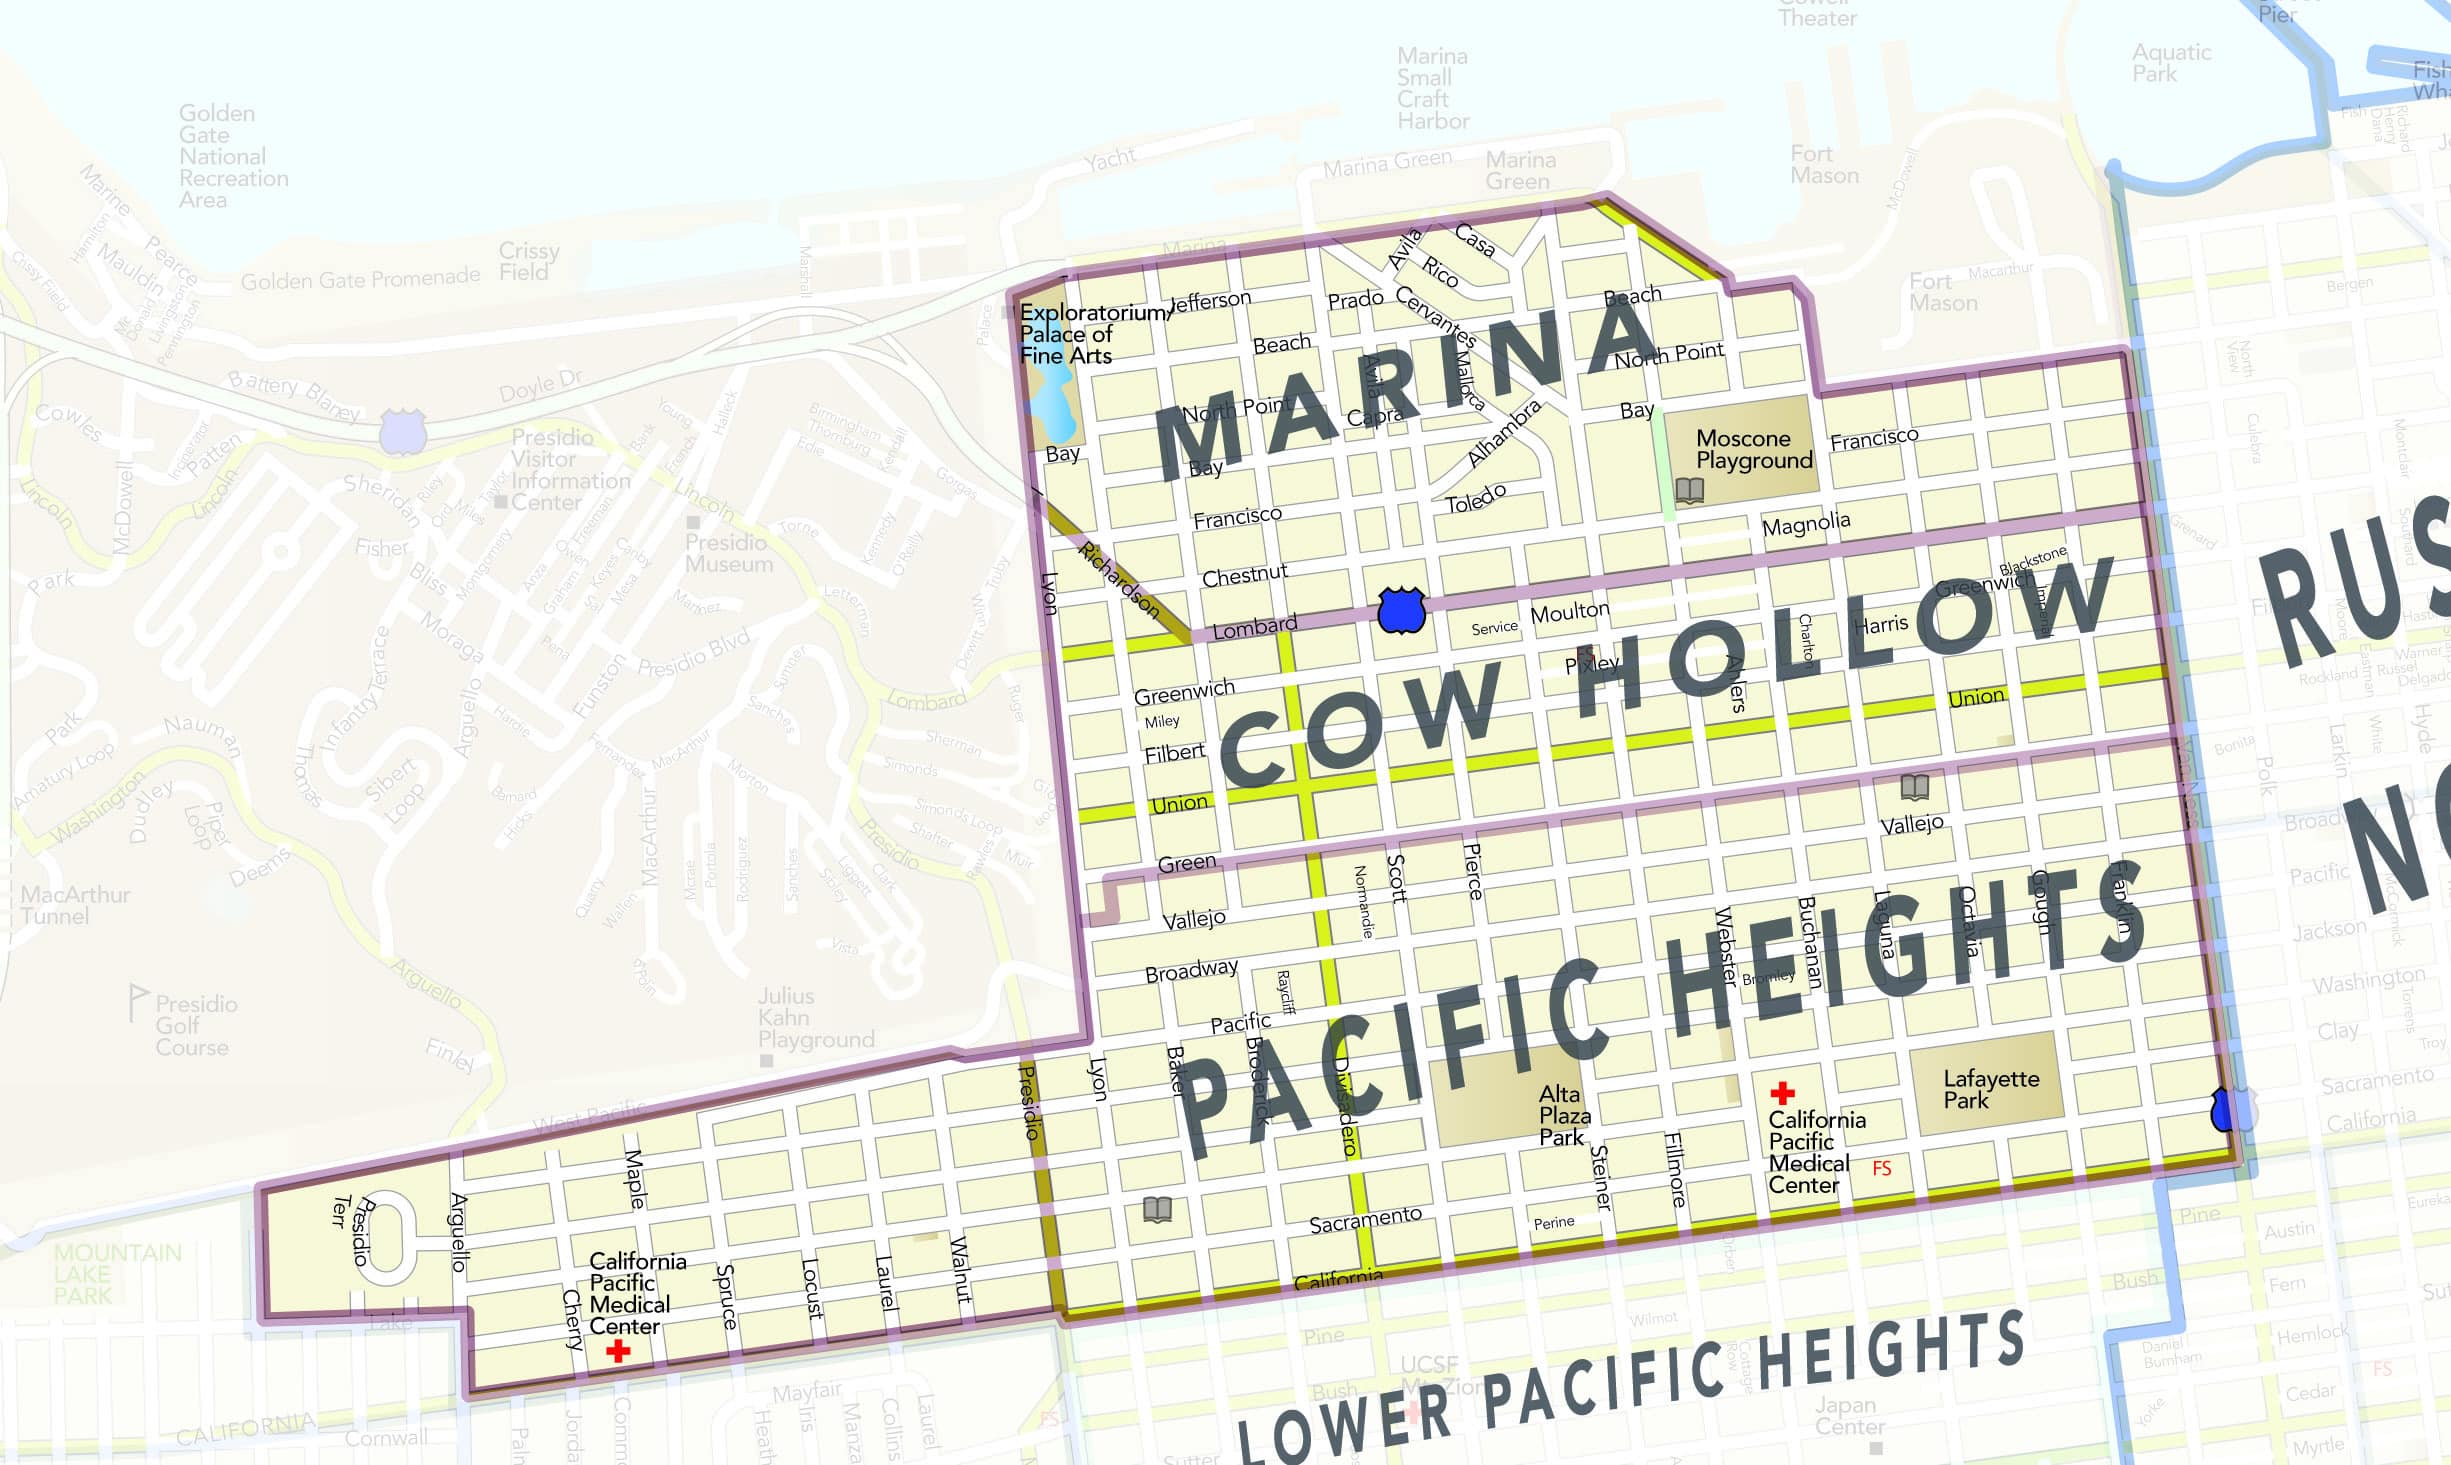 District 7: The Northside/Pacific Heights, Billionaires’ Row, etc.